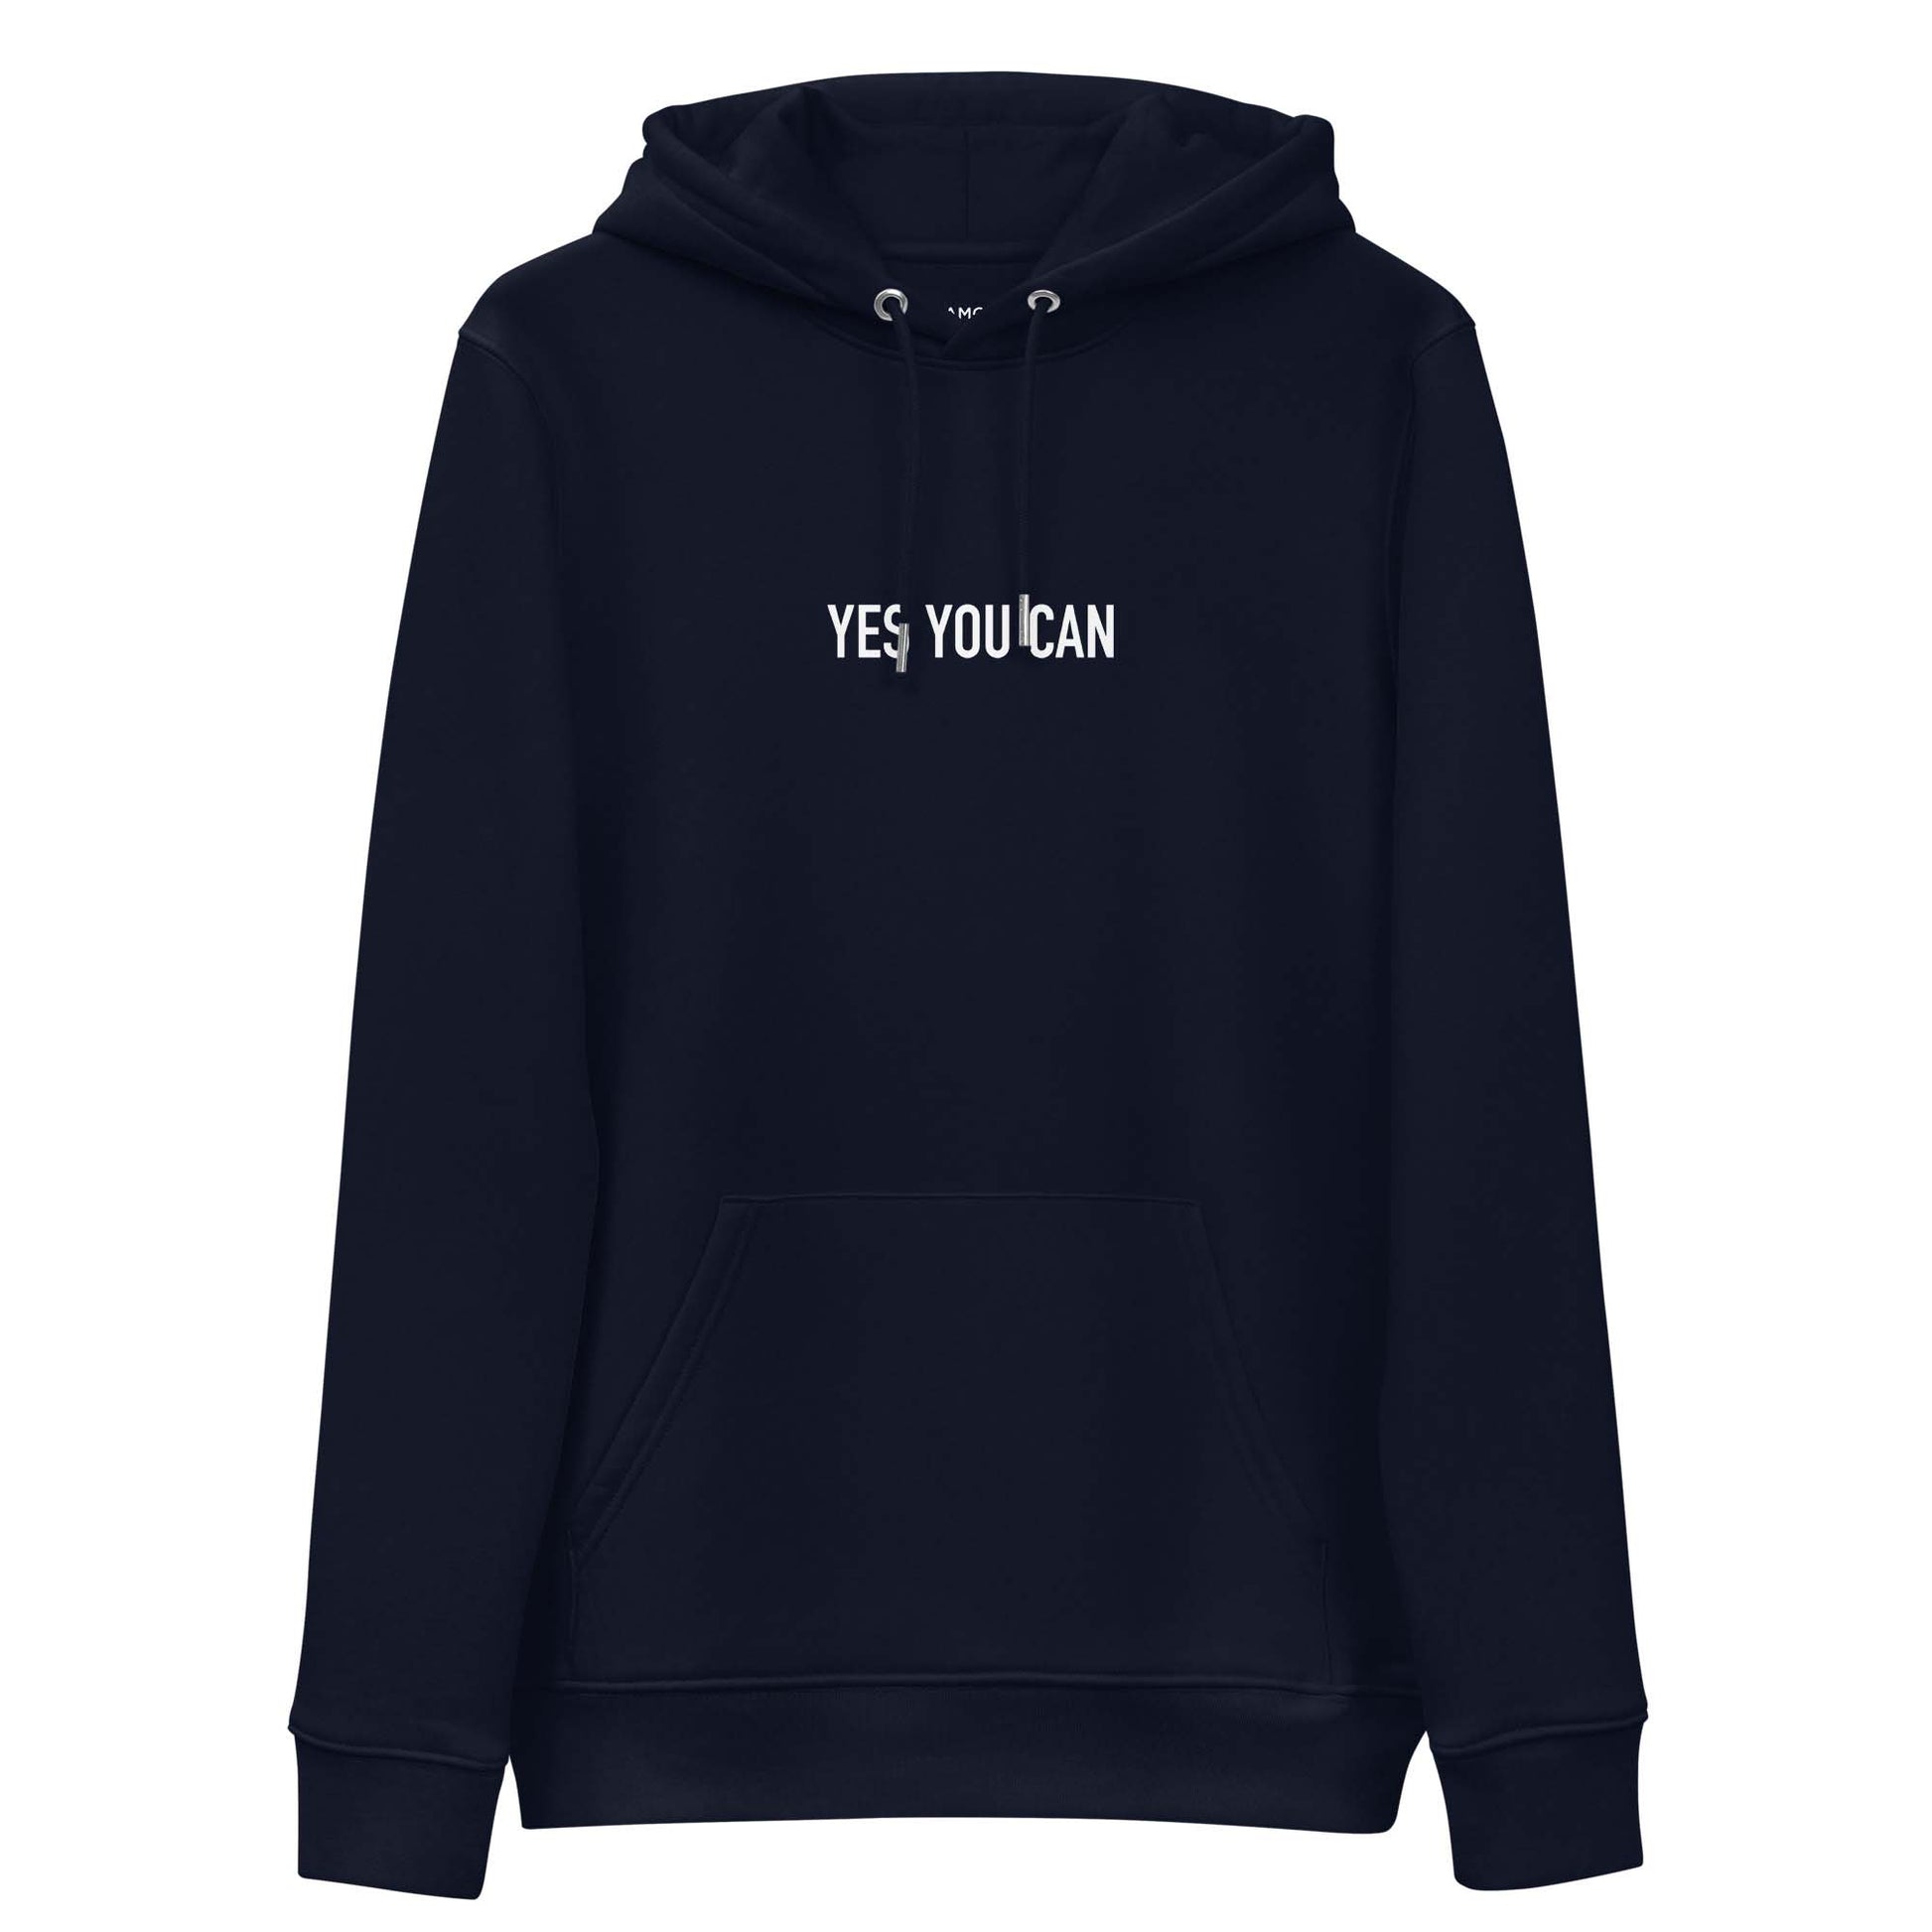 Women navy motivational hoodie with inspirational quote, "Yes You Can."